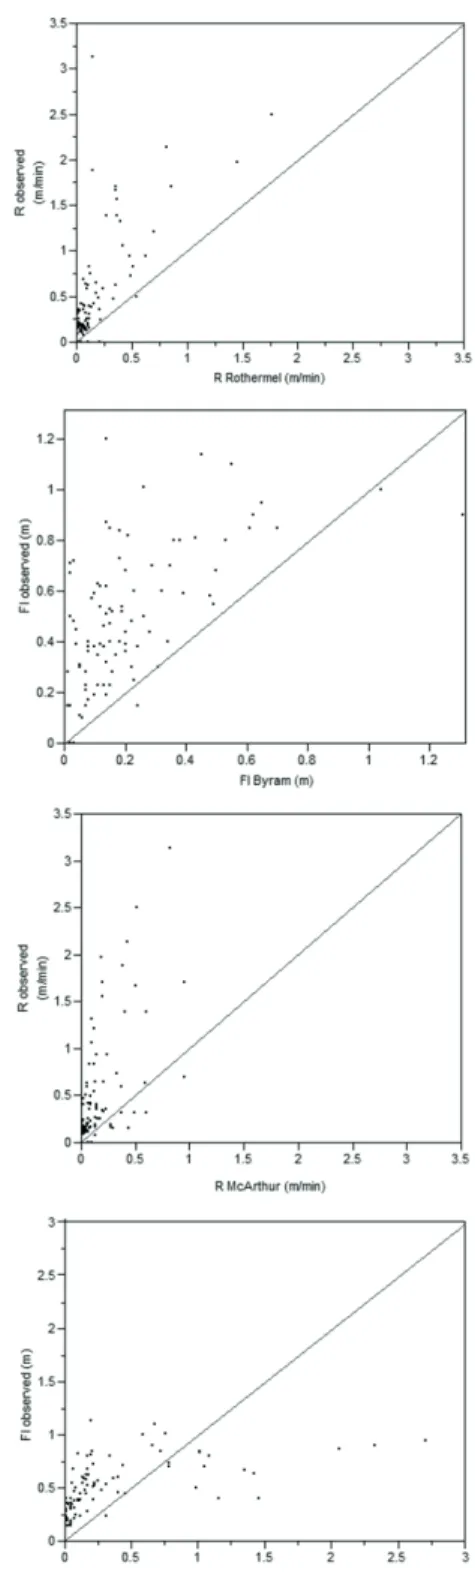 FIGURE 1 Observed  rate  of  spread  versus  predicted  with  the  Rothermel  (1972)  and  the  McArthur  (1962)  models;  observed  fl ame  length  versus  predicted  with Byram (1959) and McArthur (1962) models